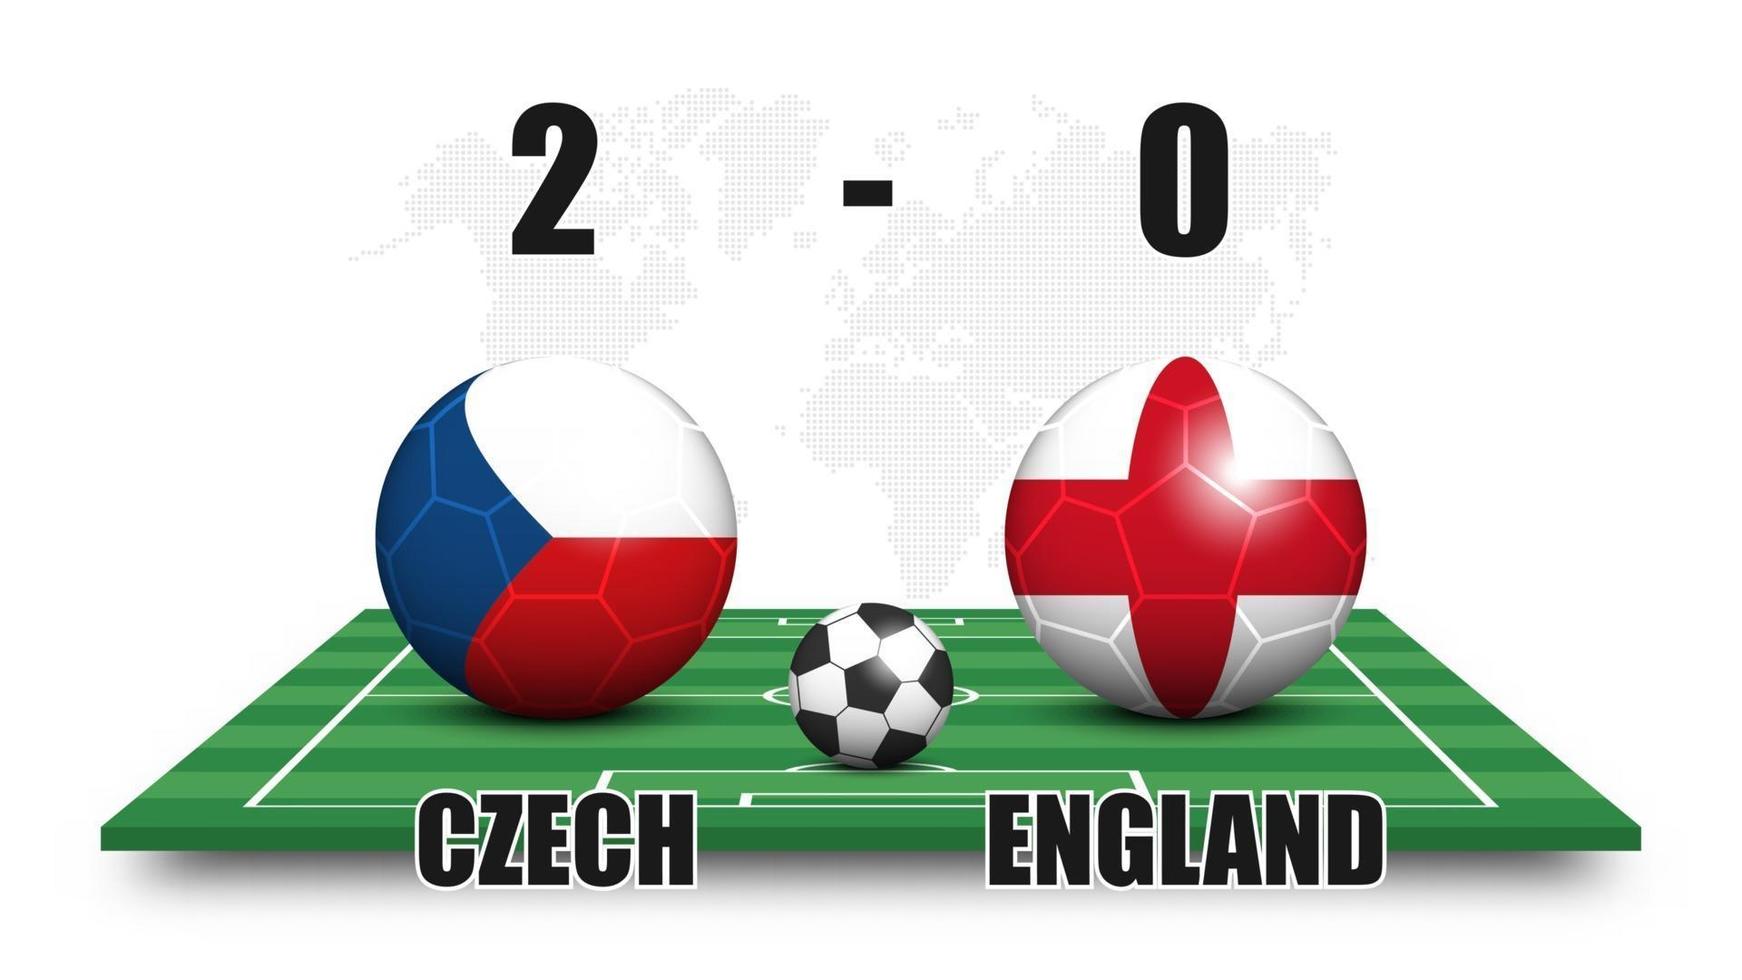 Czech vs England . Soccer ball with national flag pattern on perspective football field . Dotted world map background . Football match result and scoreboard . Sport cup tournament . 3D vector design .